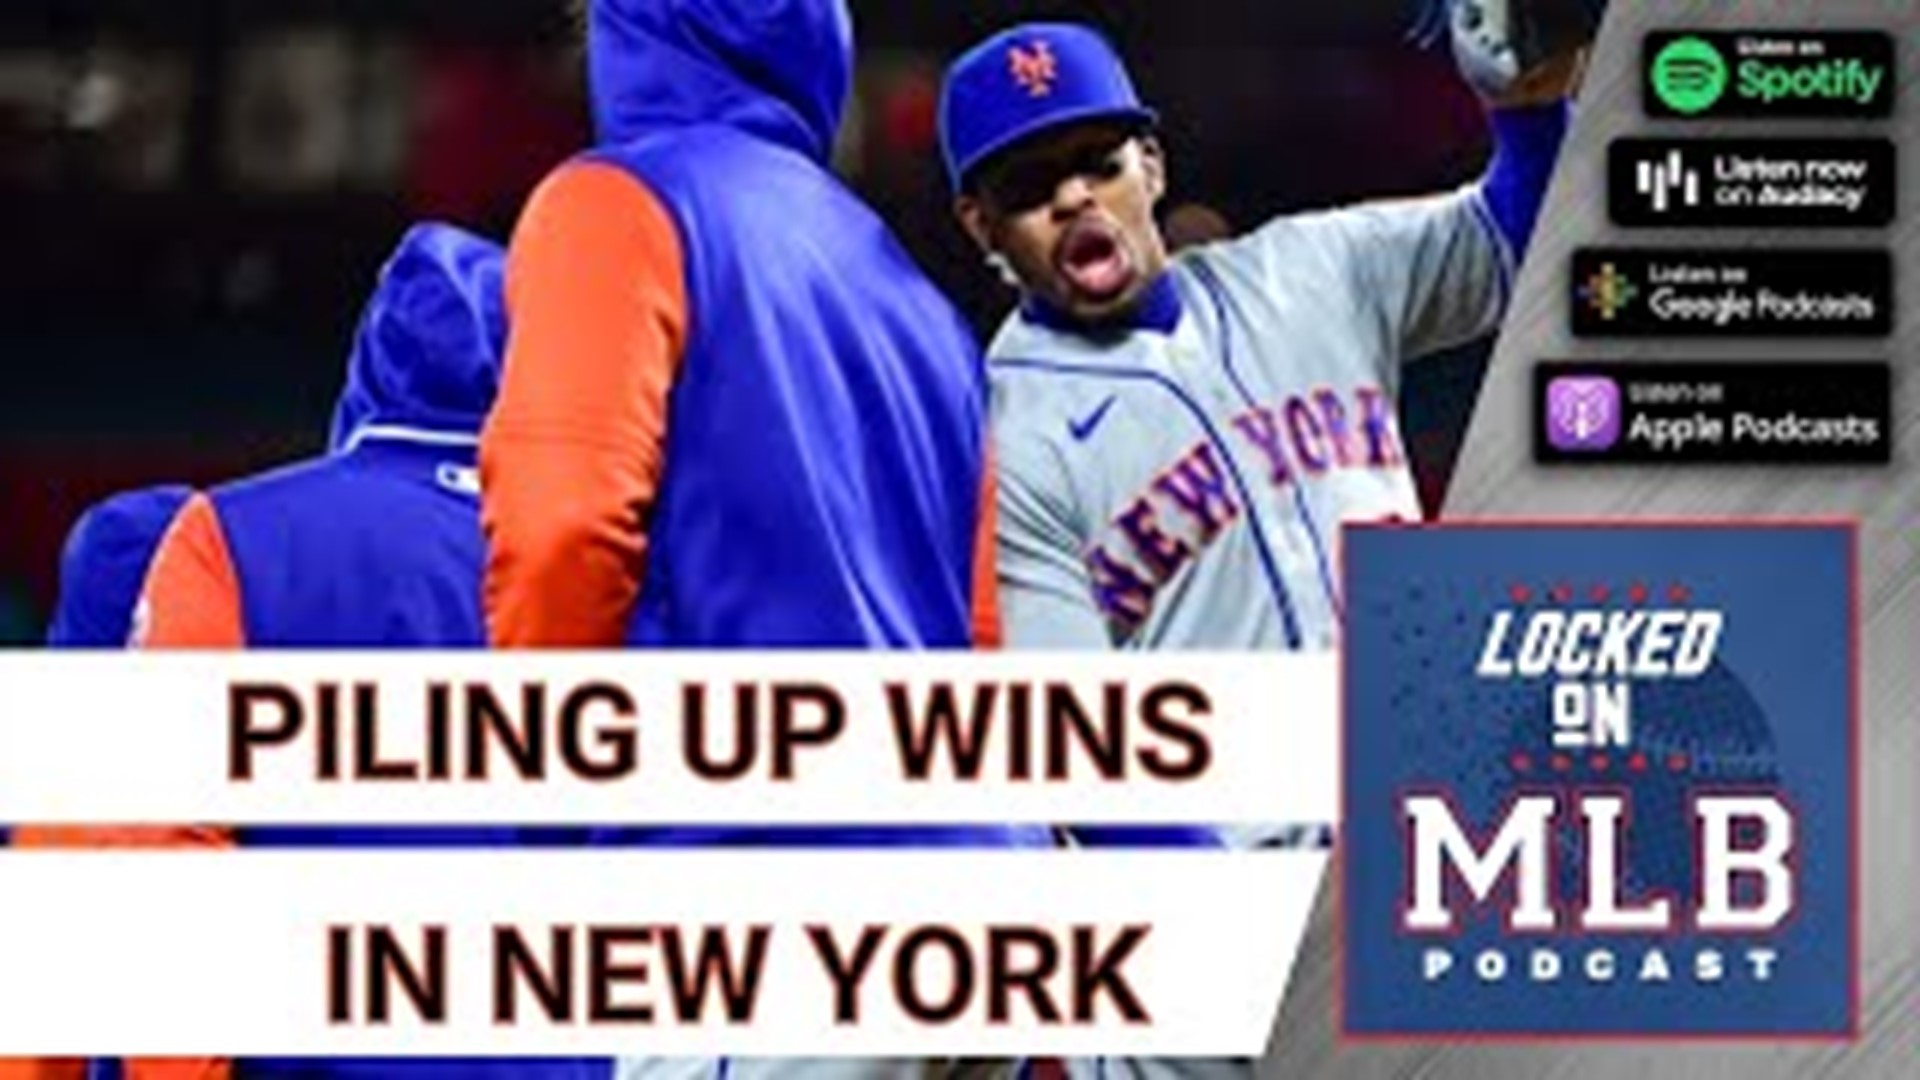 New York Winning Ways for the Mets and Yankees